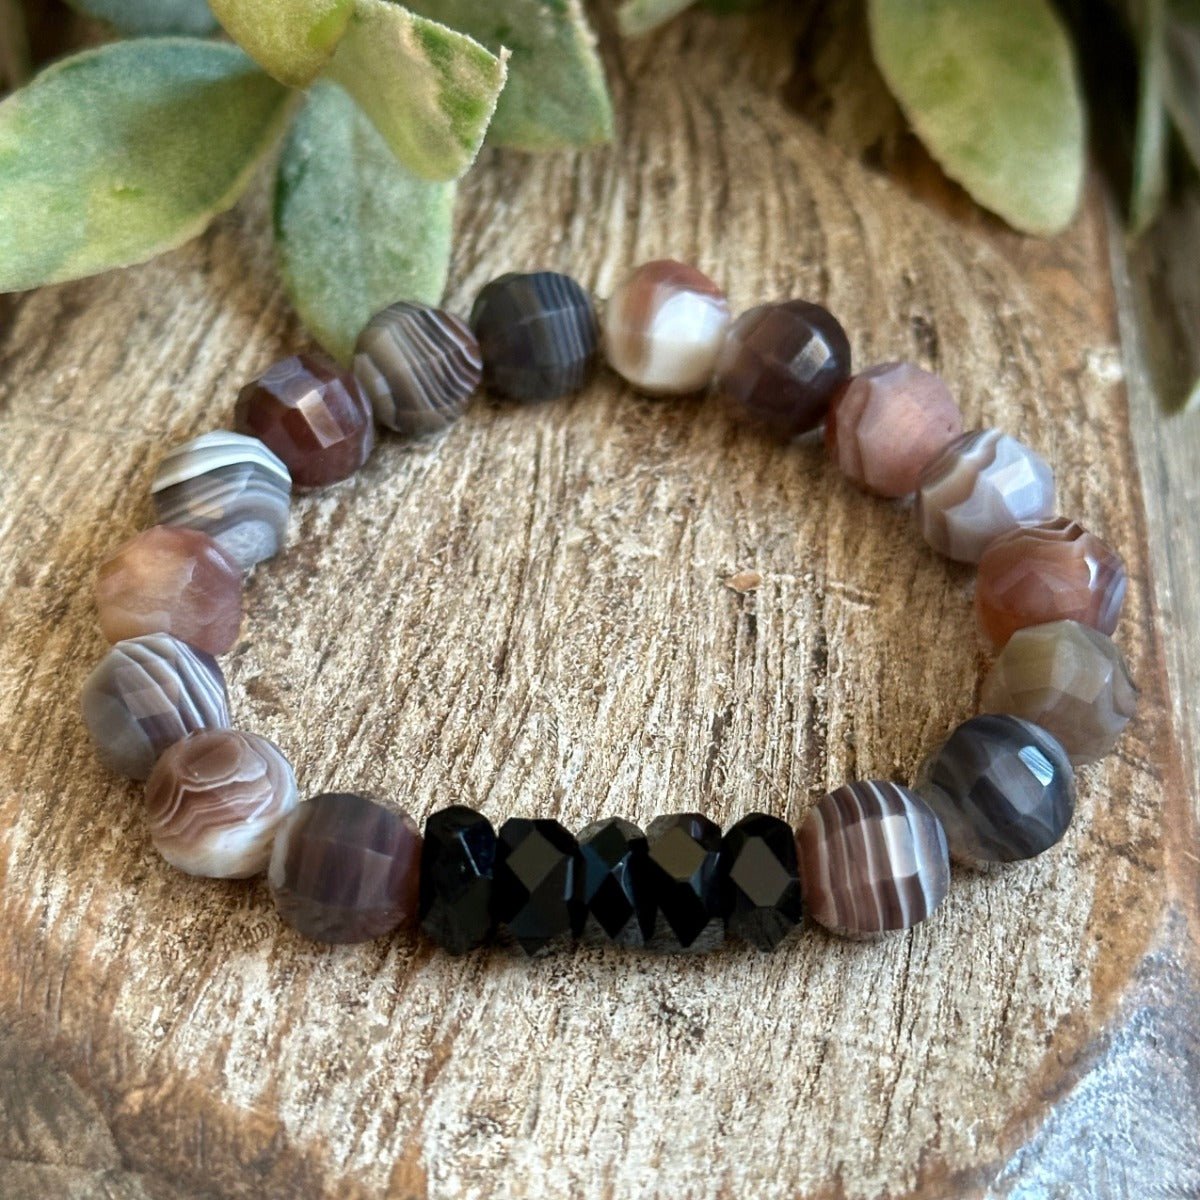 Botswana Agate Bracelet for Grief, Healing and Strength. Men and Women